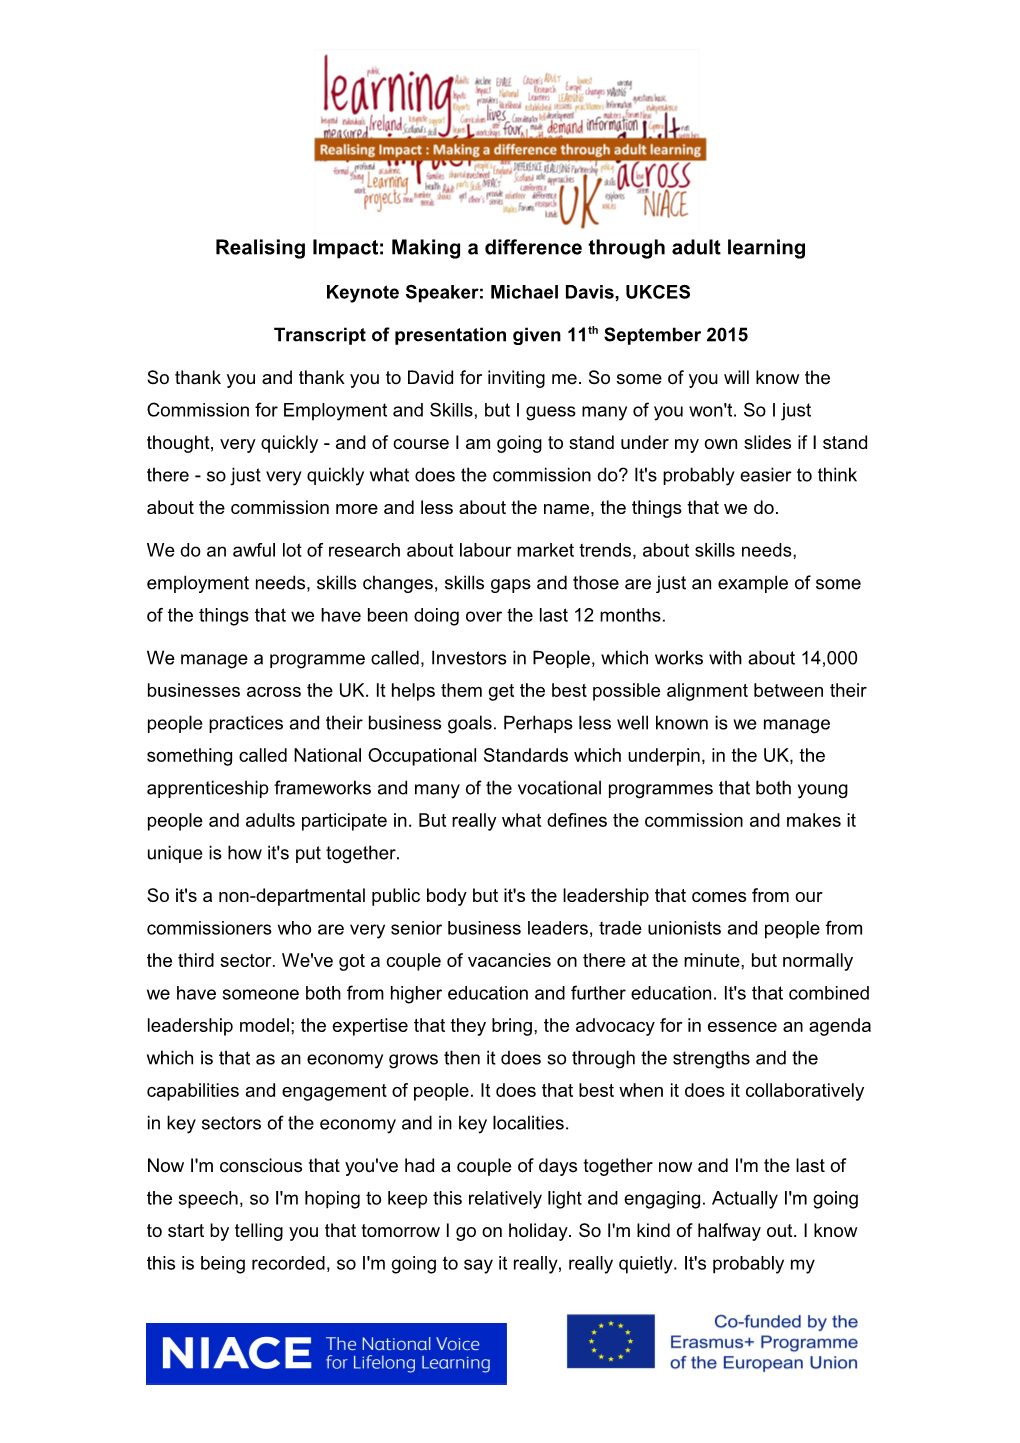 Realising Impact: Making a Difference Through Adult Learning